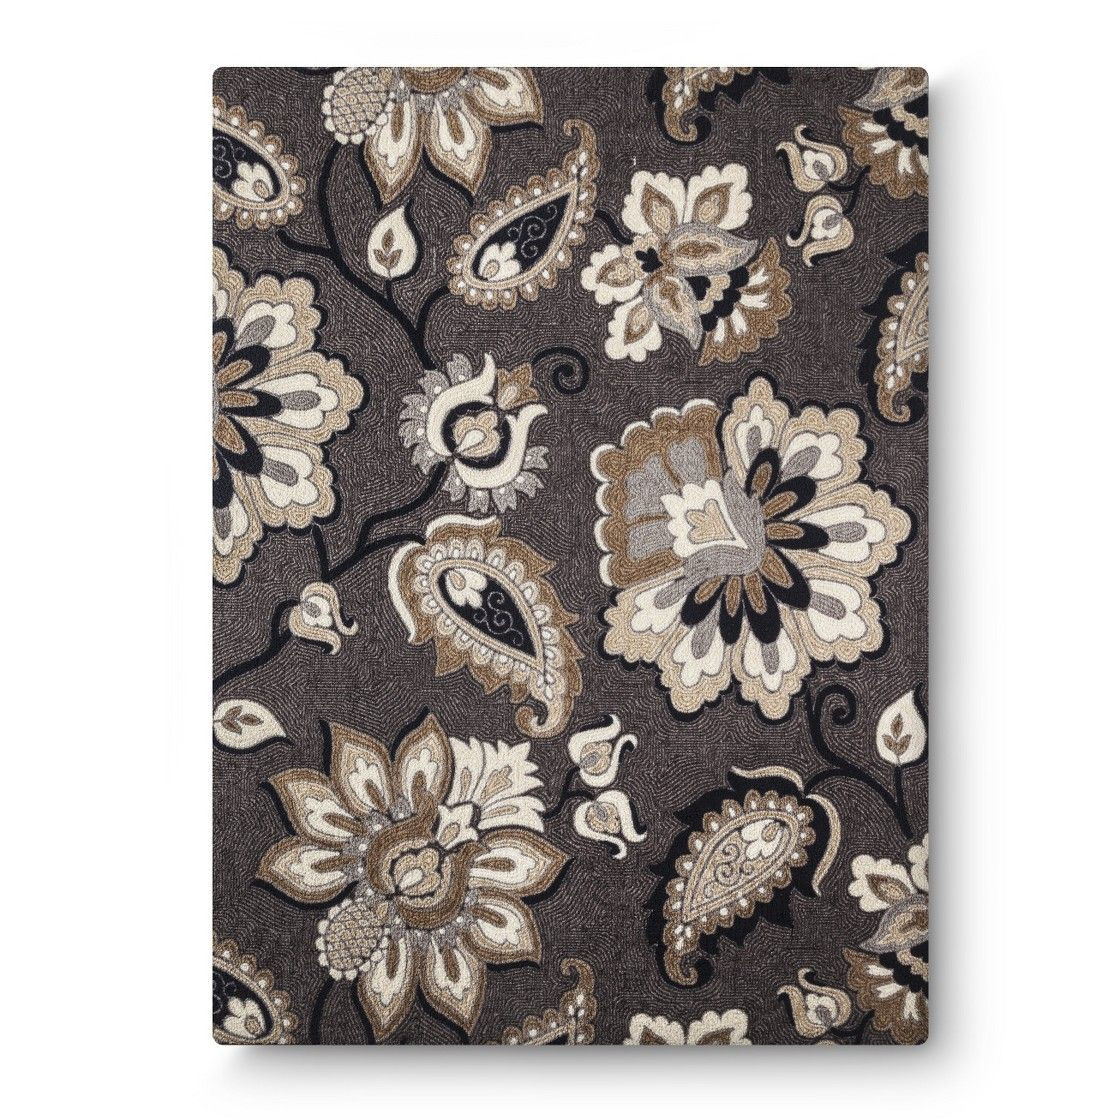 Target Living Room Rugs
 Floral Print Rug living room from Tar With images